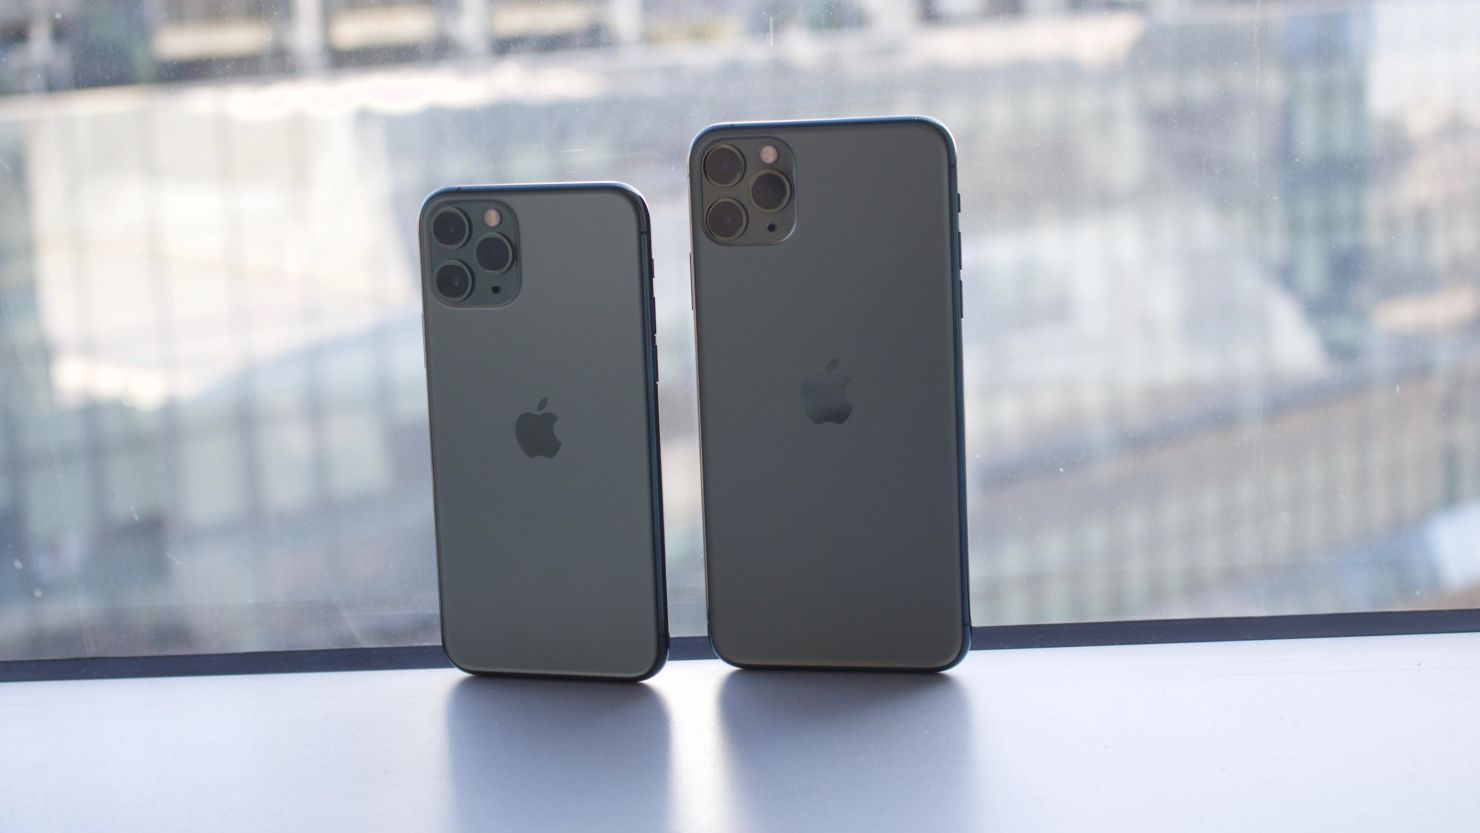 iPhone 11 Pro Max review: what's it like on the other side